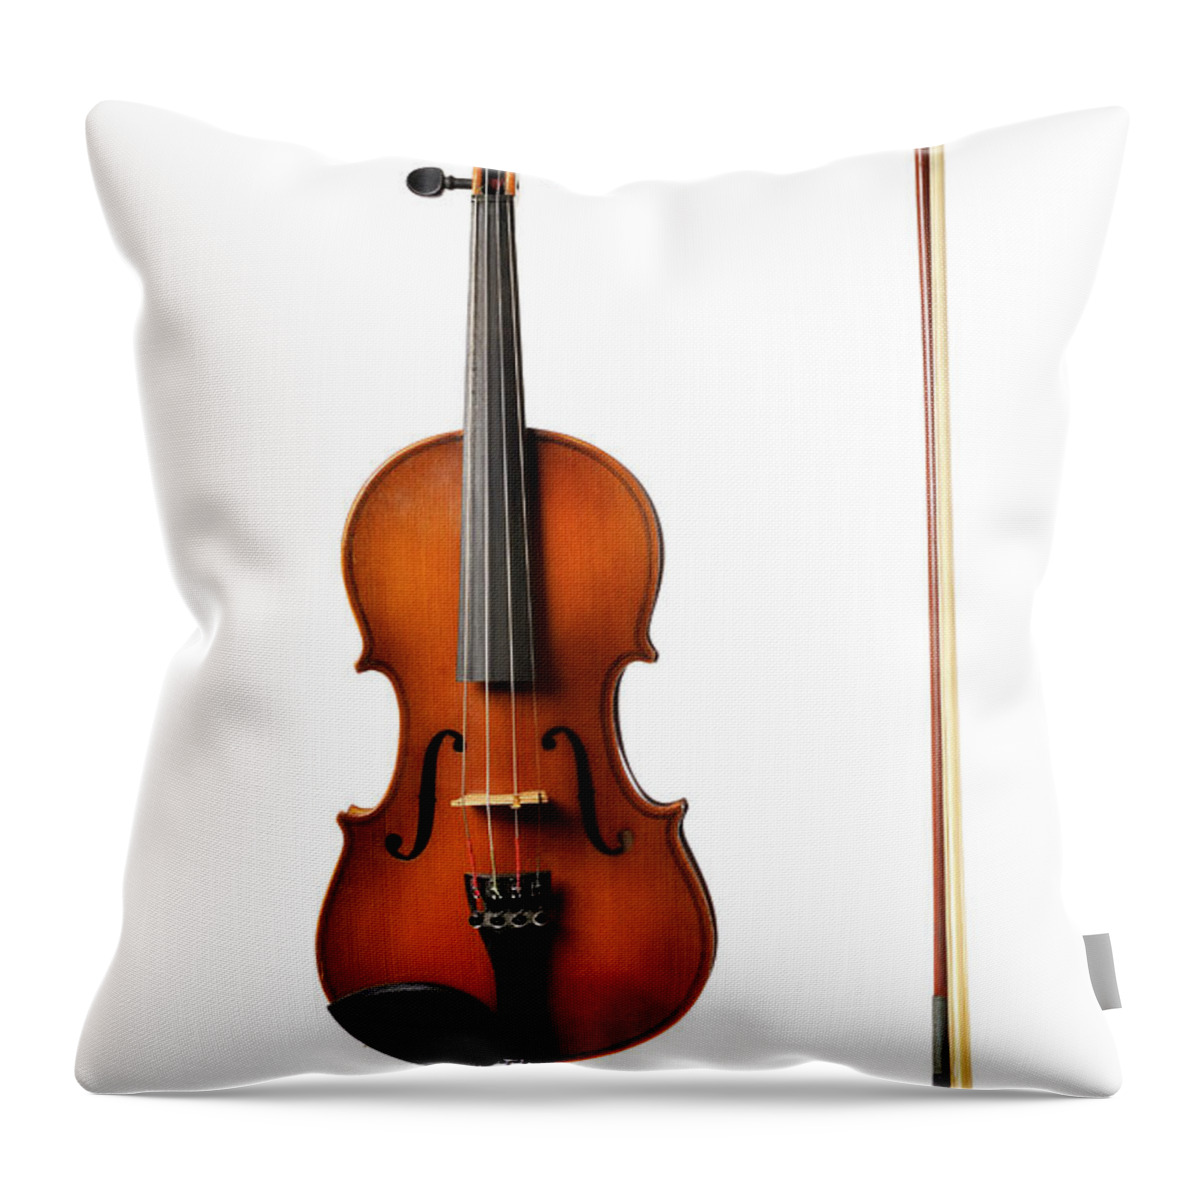 Art Throw Pillow featuring the photograph Violin On White by Sjo